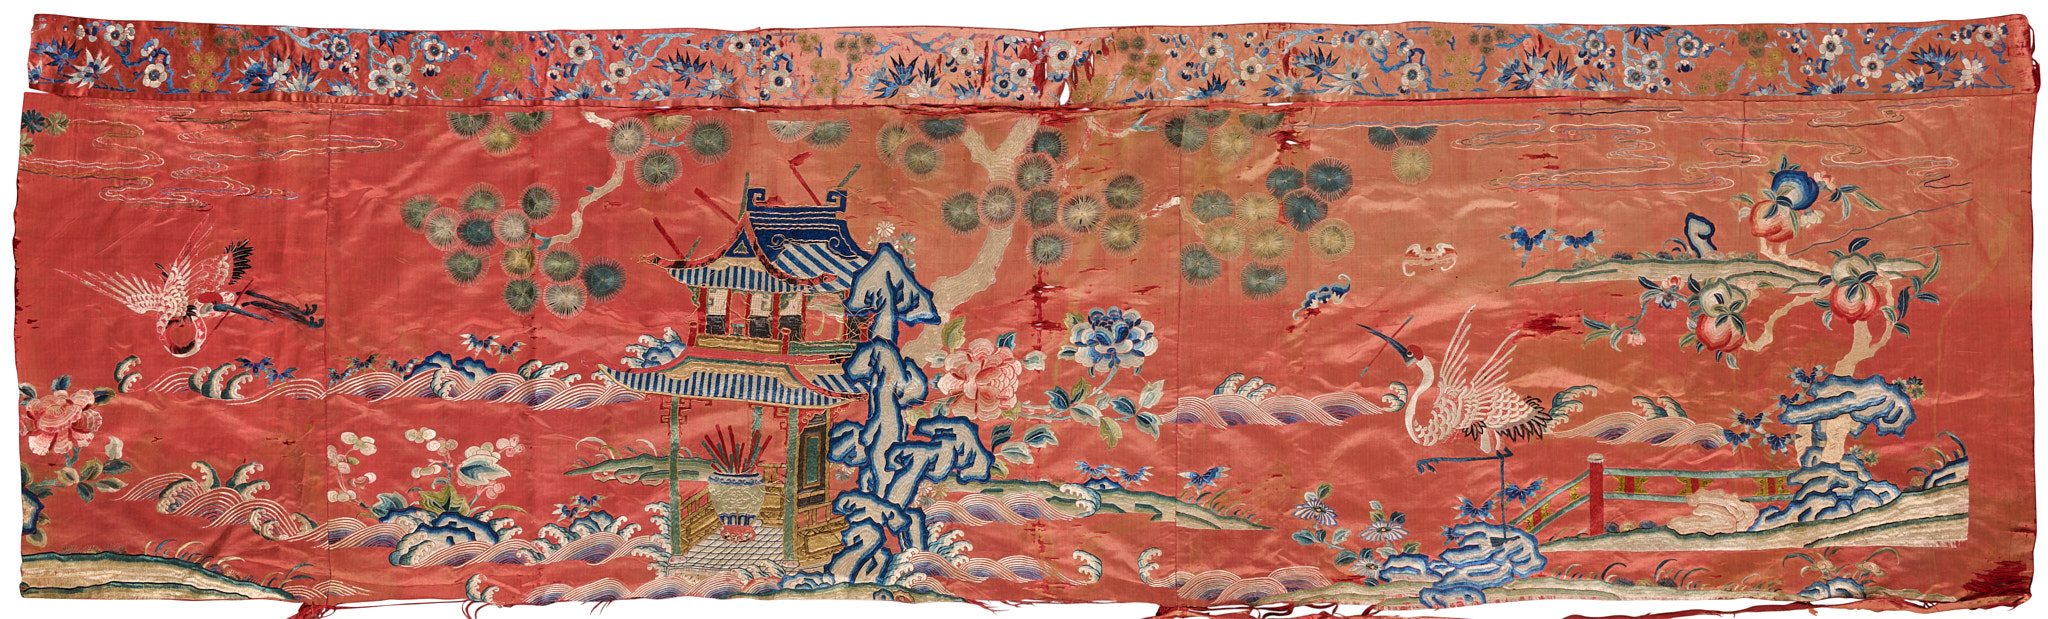 A CHINESE EMBROIDERED SILK 'IMMORTALS PARADISE' PANEL, QING DYNASTY, 19TH CENTURY